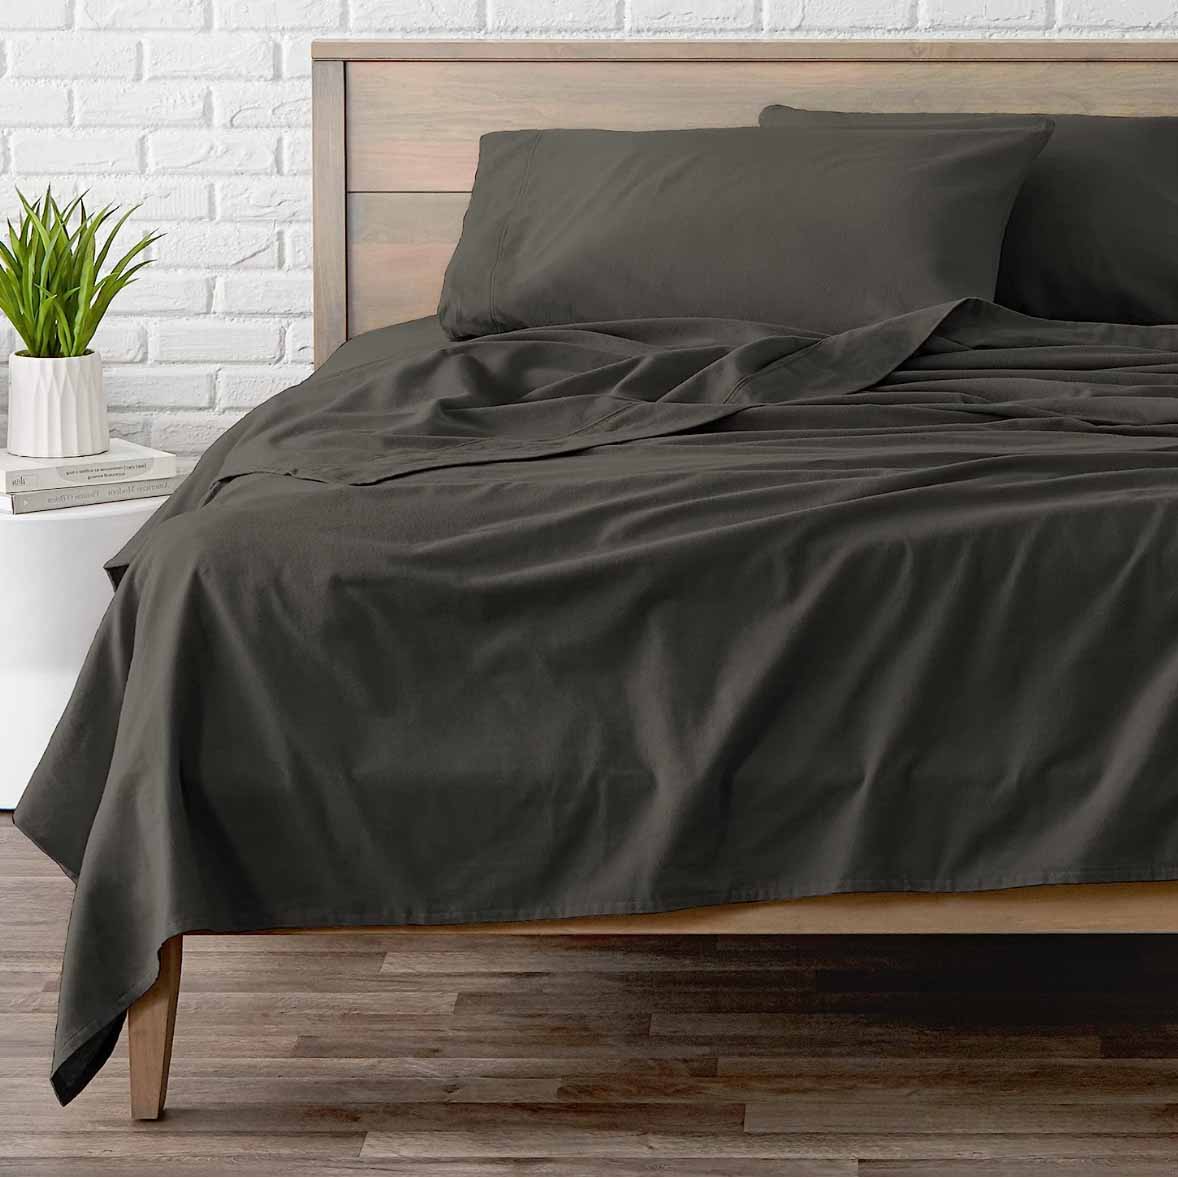 Black flannel sheet fitted on bed